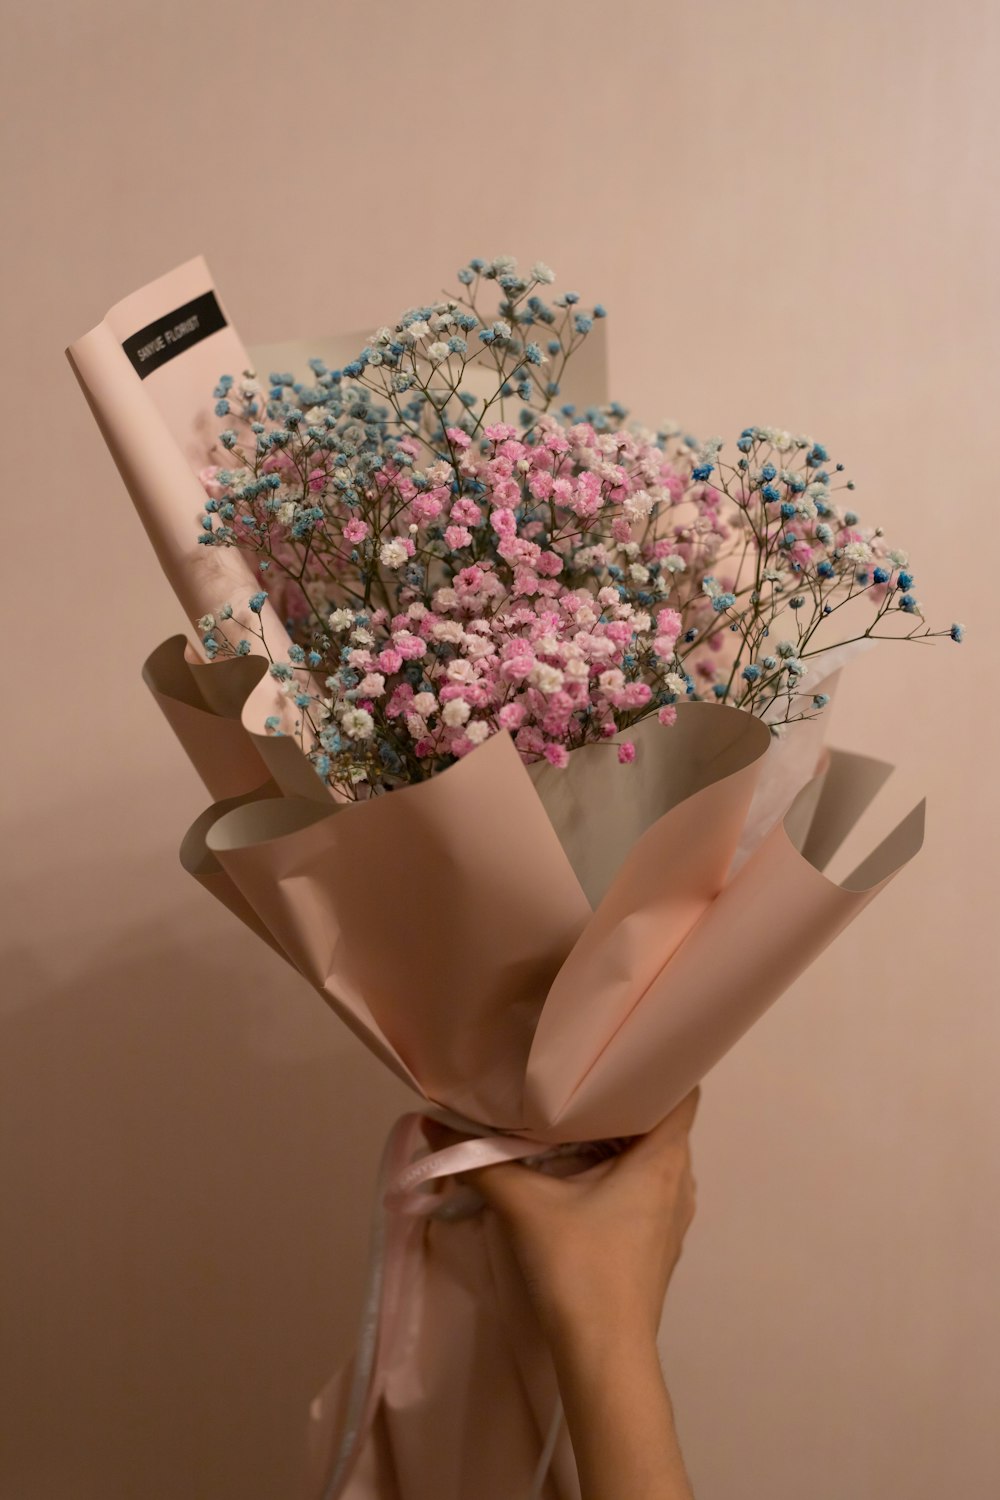 Pink and white flowers in brown paper bag photo – Free Flower Image on  Unsplash